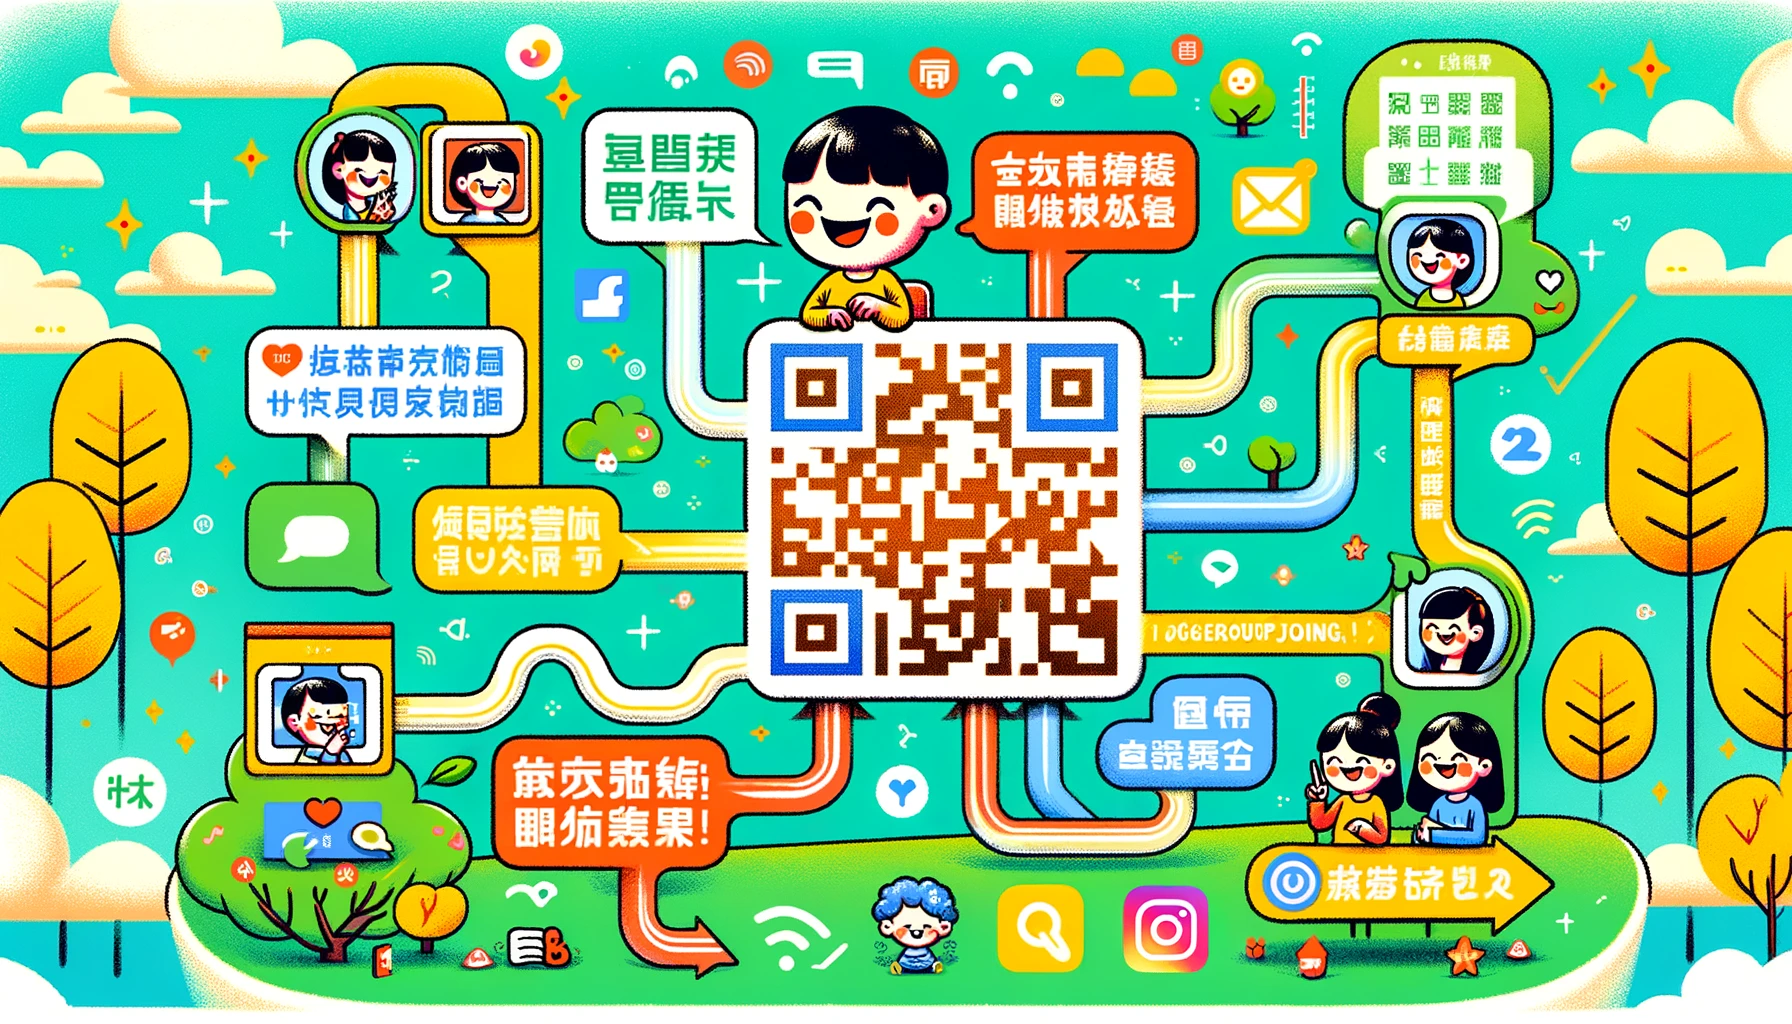 A cheerful illustration showing the use of a multi-functional QR code (活码) for group joining. The image includes a large central QR code labeled as 活码, connected to multiple smaller QR codes representing different WeChat groups. When one group reaches 200 members, the system automatically redirects users to the next available group. The background is lively with colorful graphics representing social media and connectivity, with icons for WeChat, QQ, and DingTalk. The overall style is playful and vibrant, focusing on the efficiency and fun of the 活码 system.